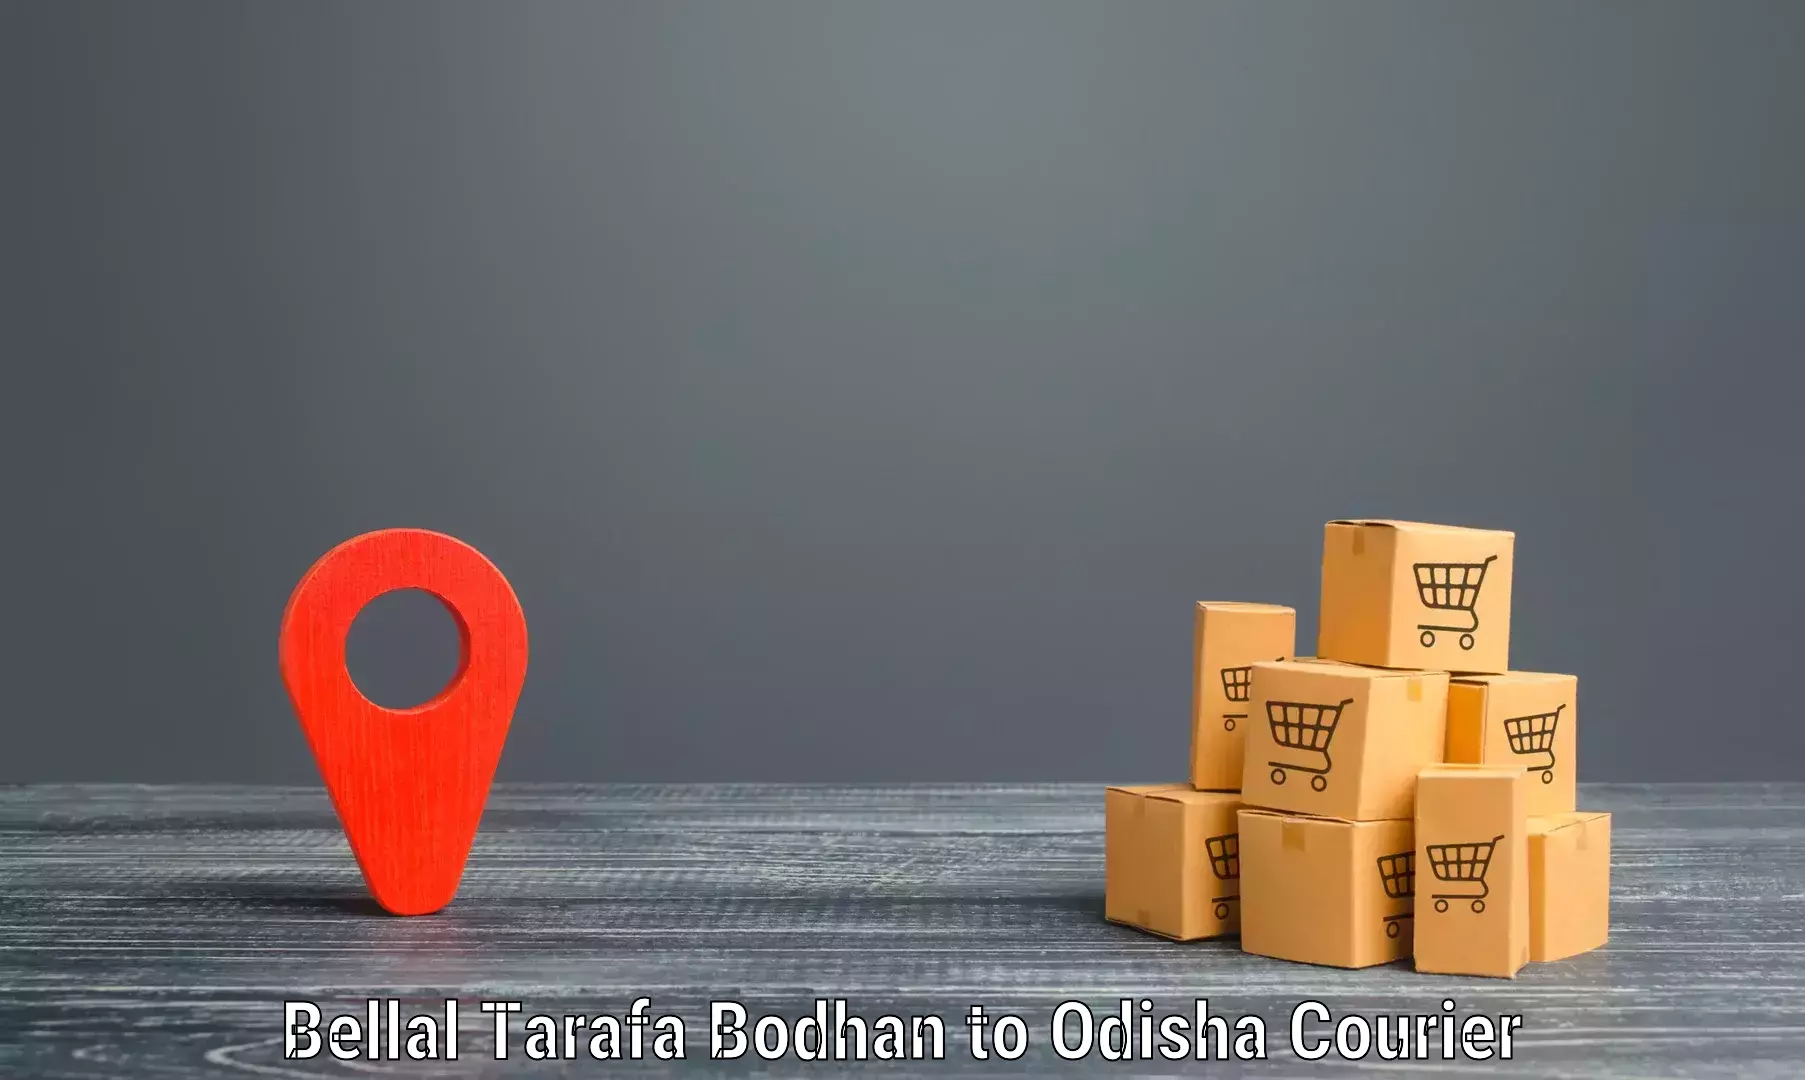 Express delivery solutions Bellal Tarafa Bodhan to Paradip